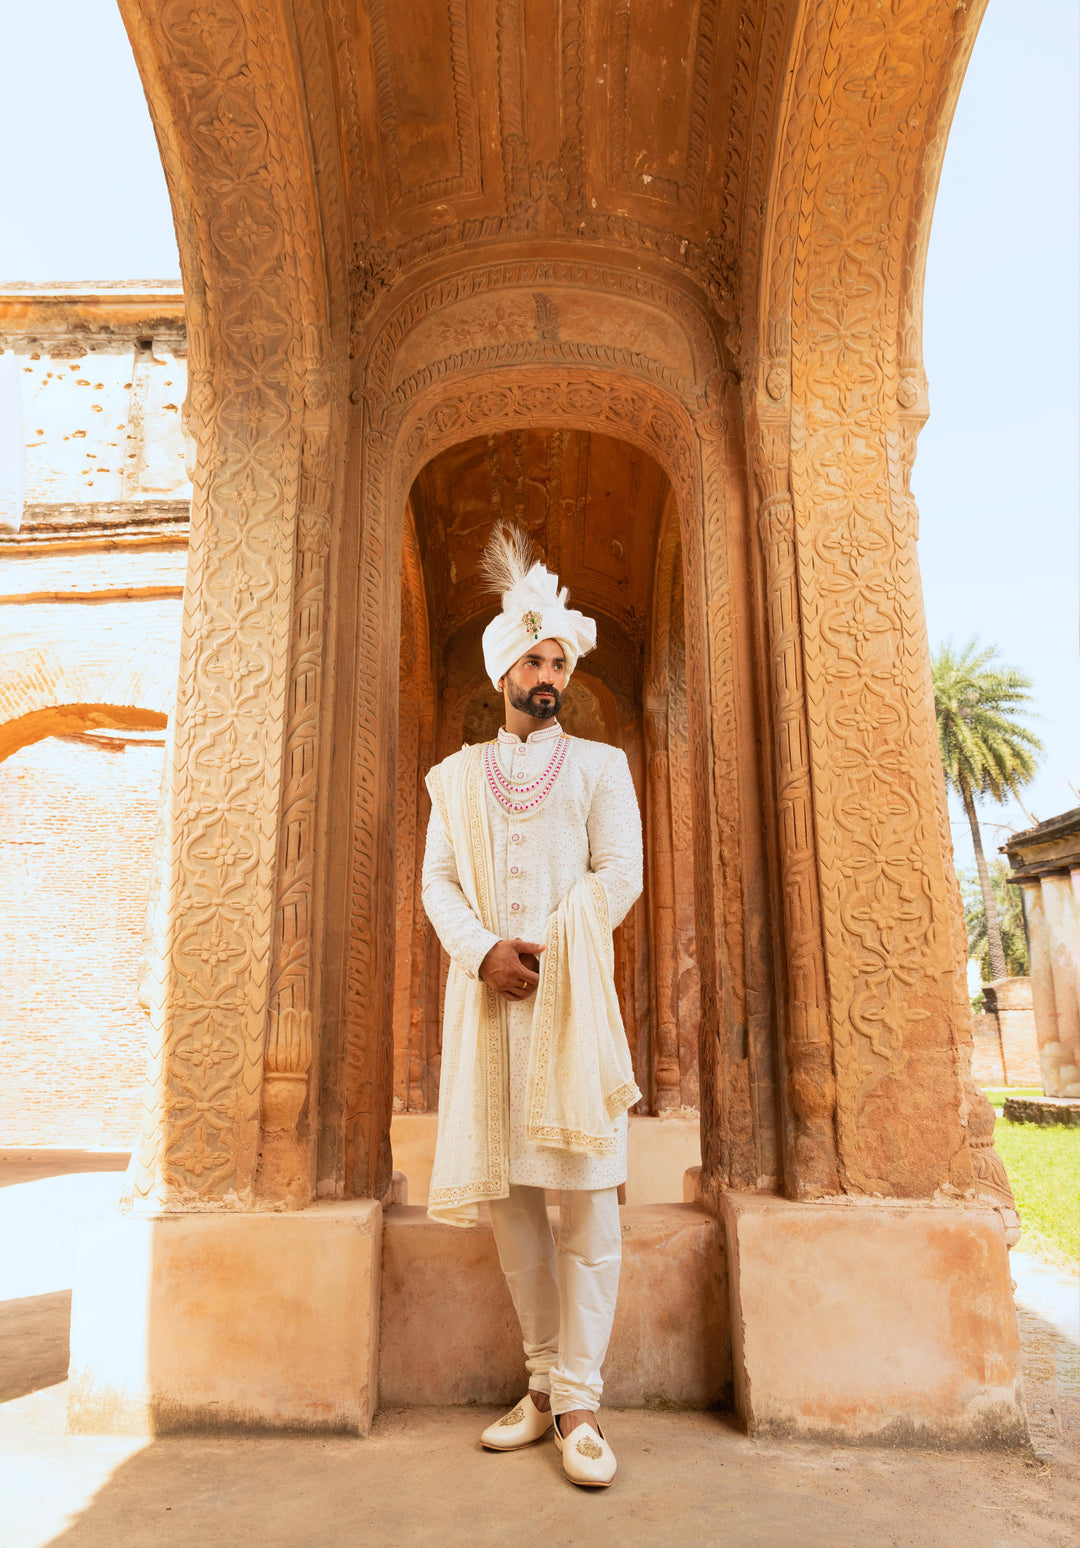 White Georgette Sherwani with Threadwork Artistry and Glistening Beads Accessories Included